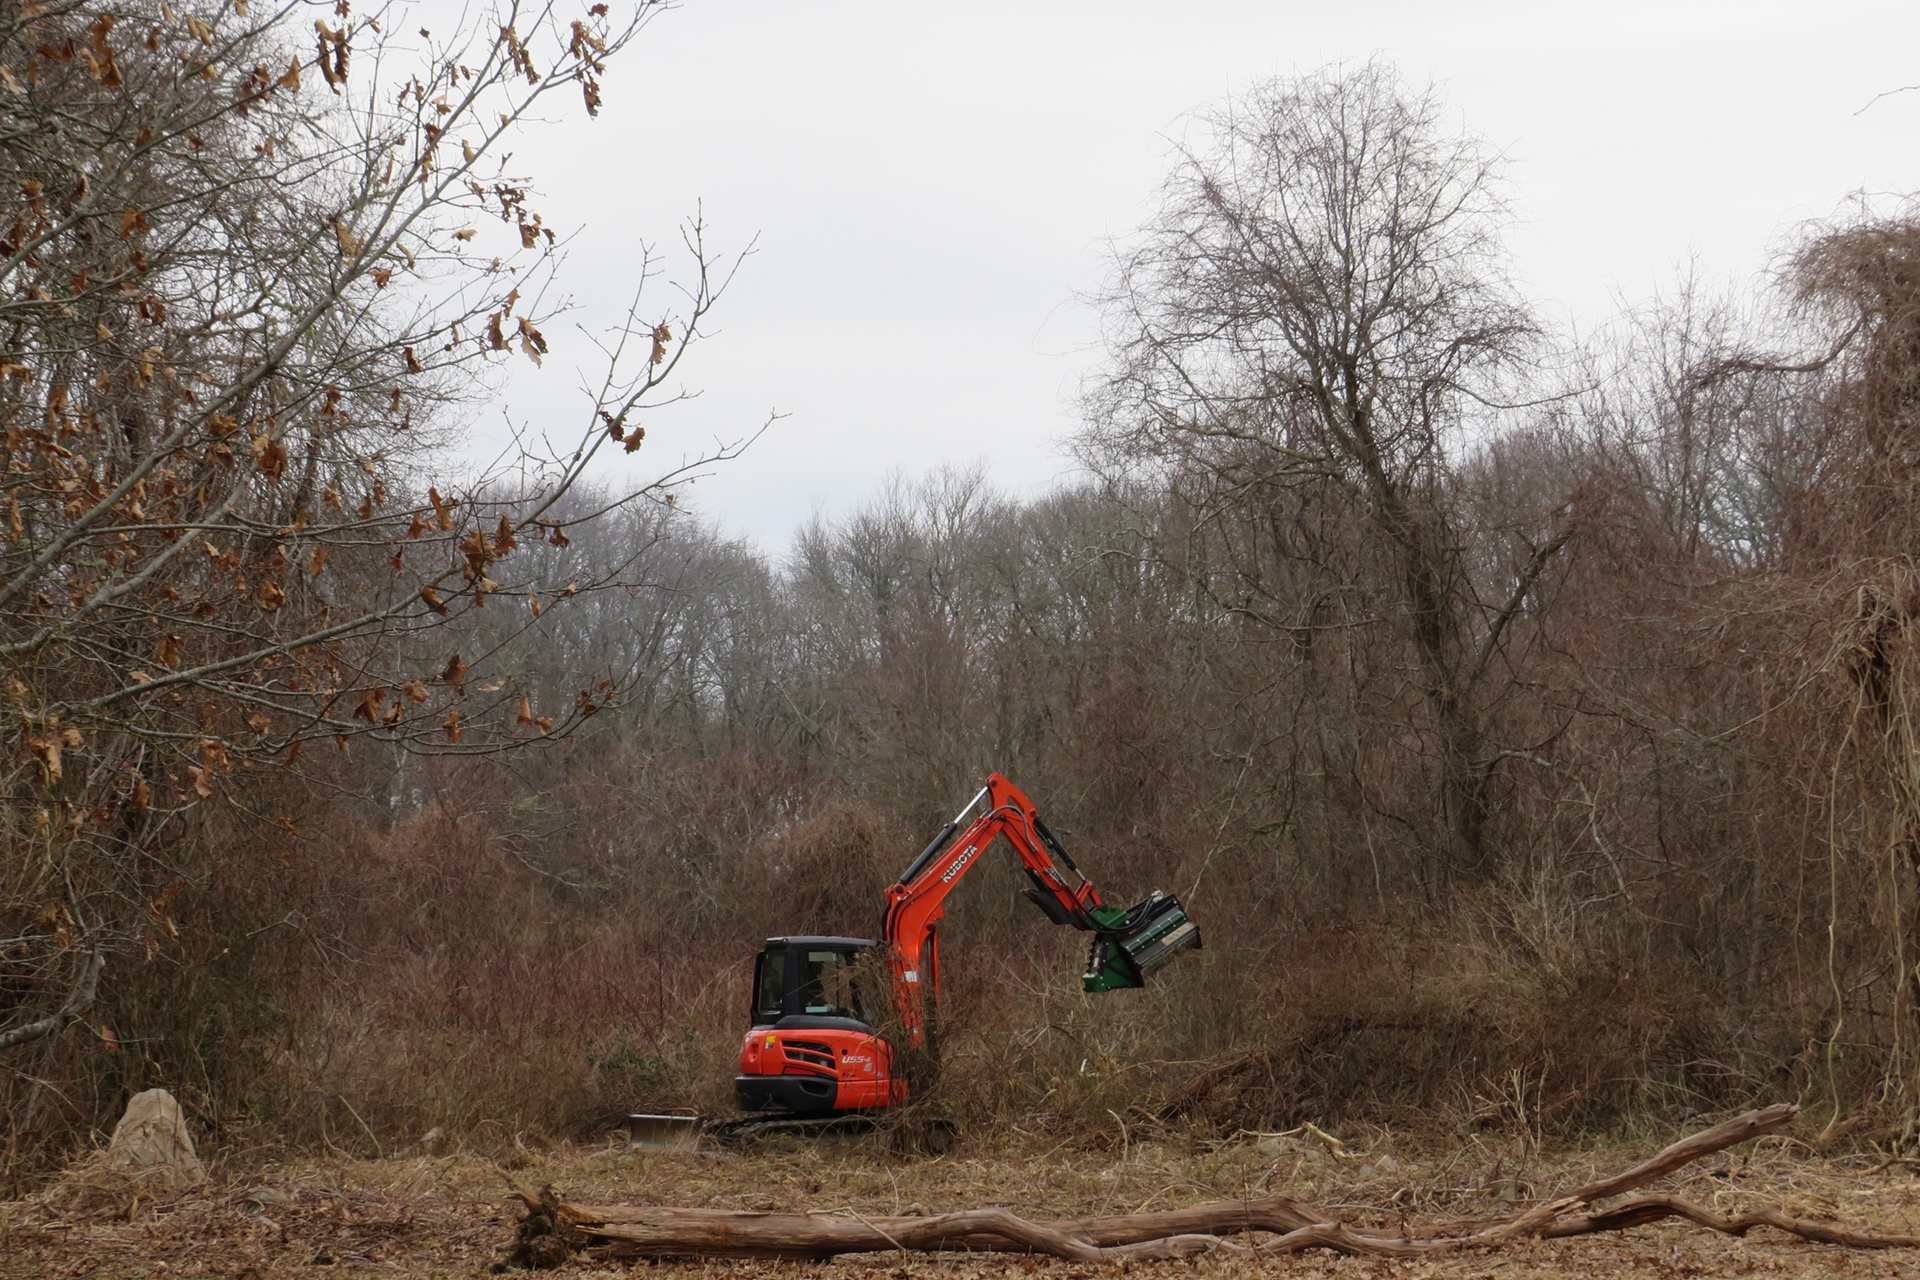 Excavator clearing brush at Allens Pond